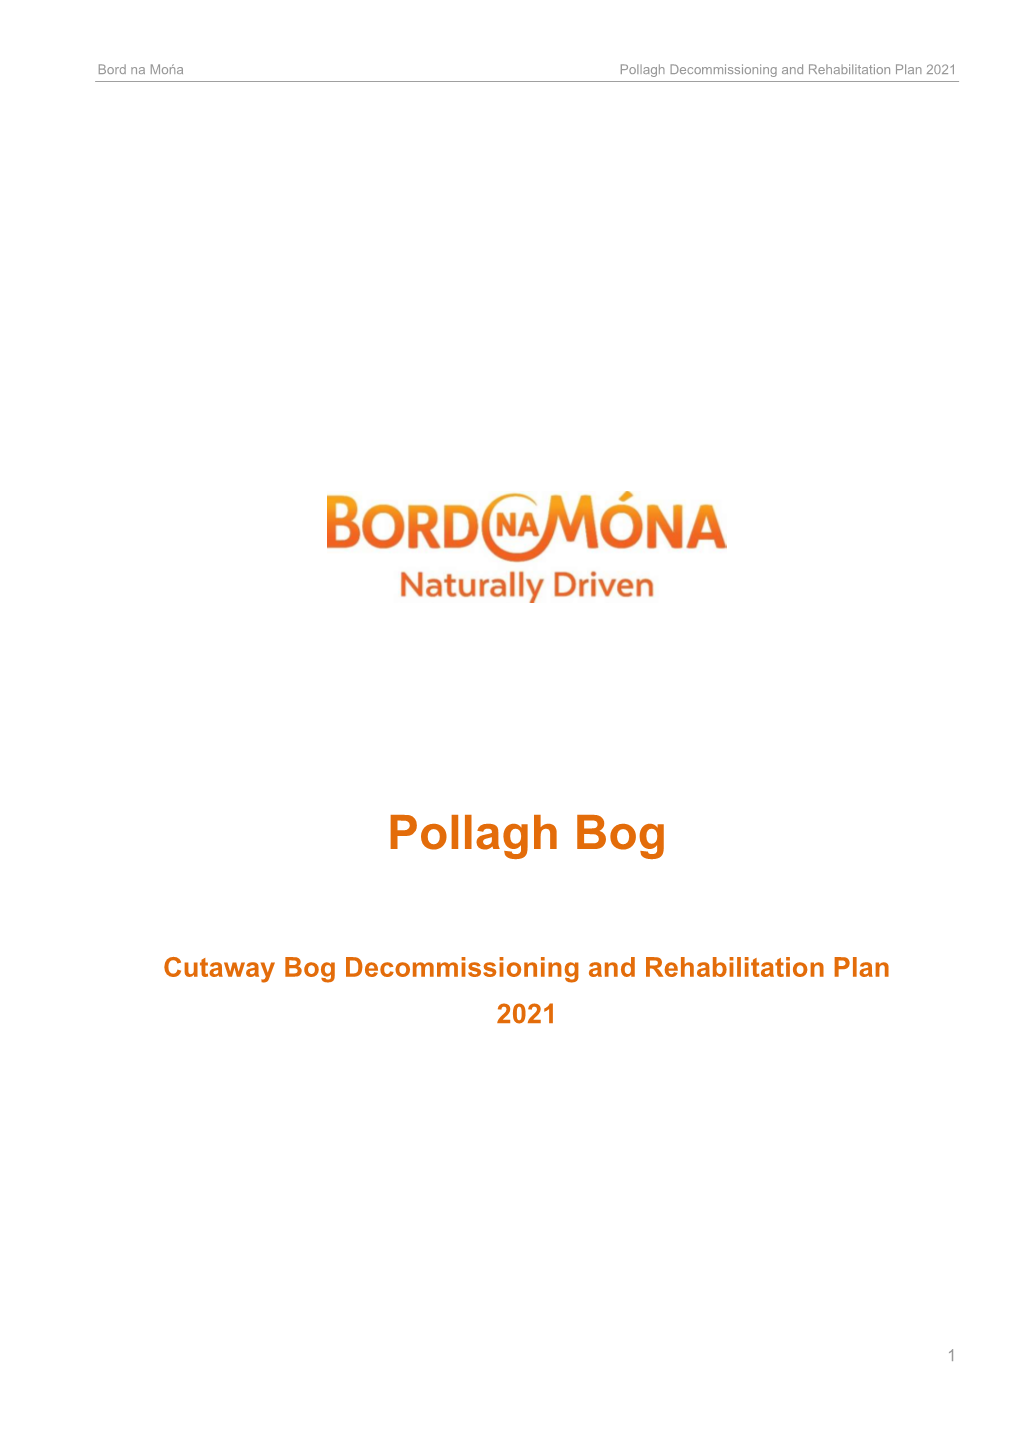 Pollagh Decommissioning and Rehabilitation Plan 2021